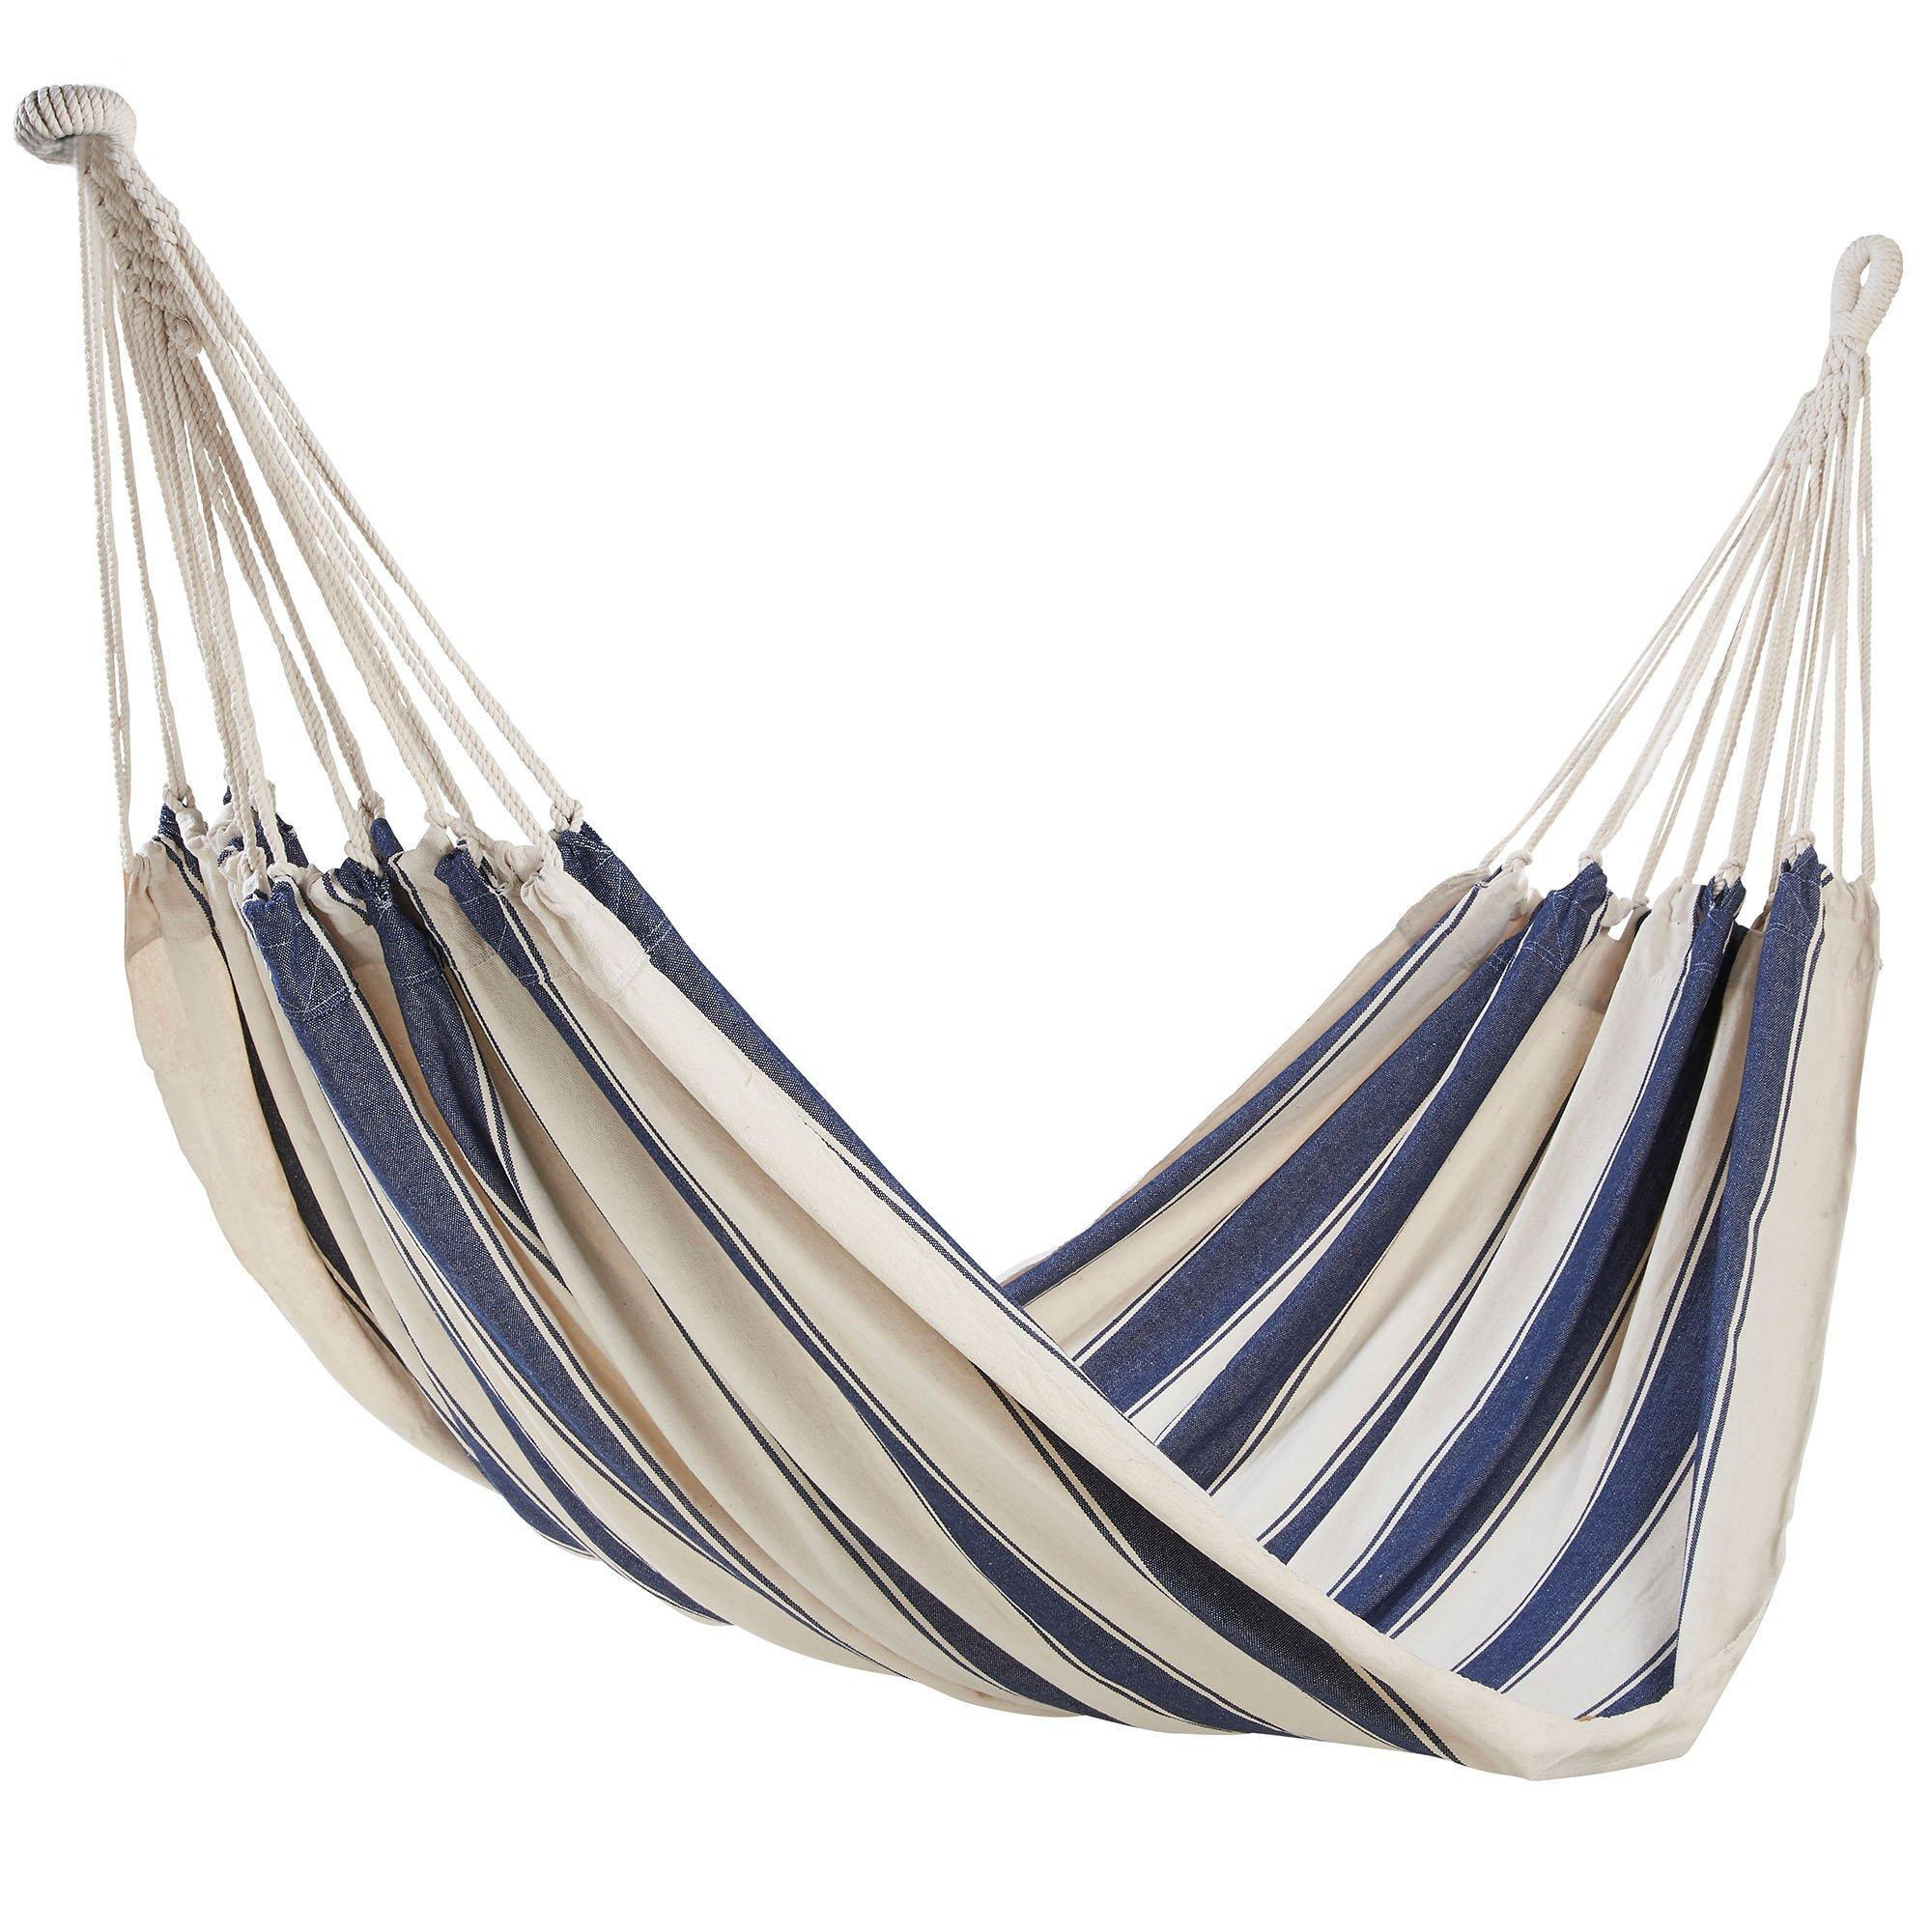 Striped Cotton Garden and Patio 2 Seater Double Hammock - image 1